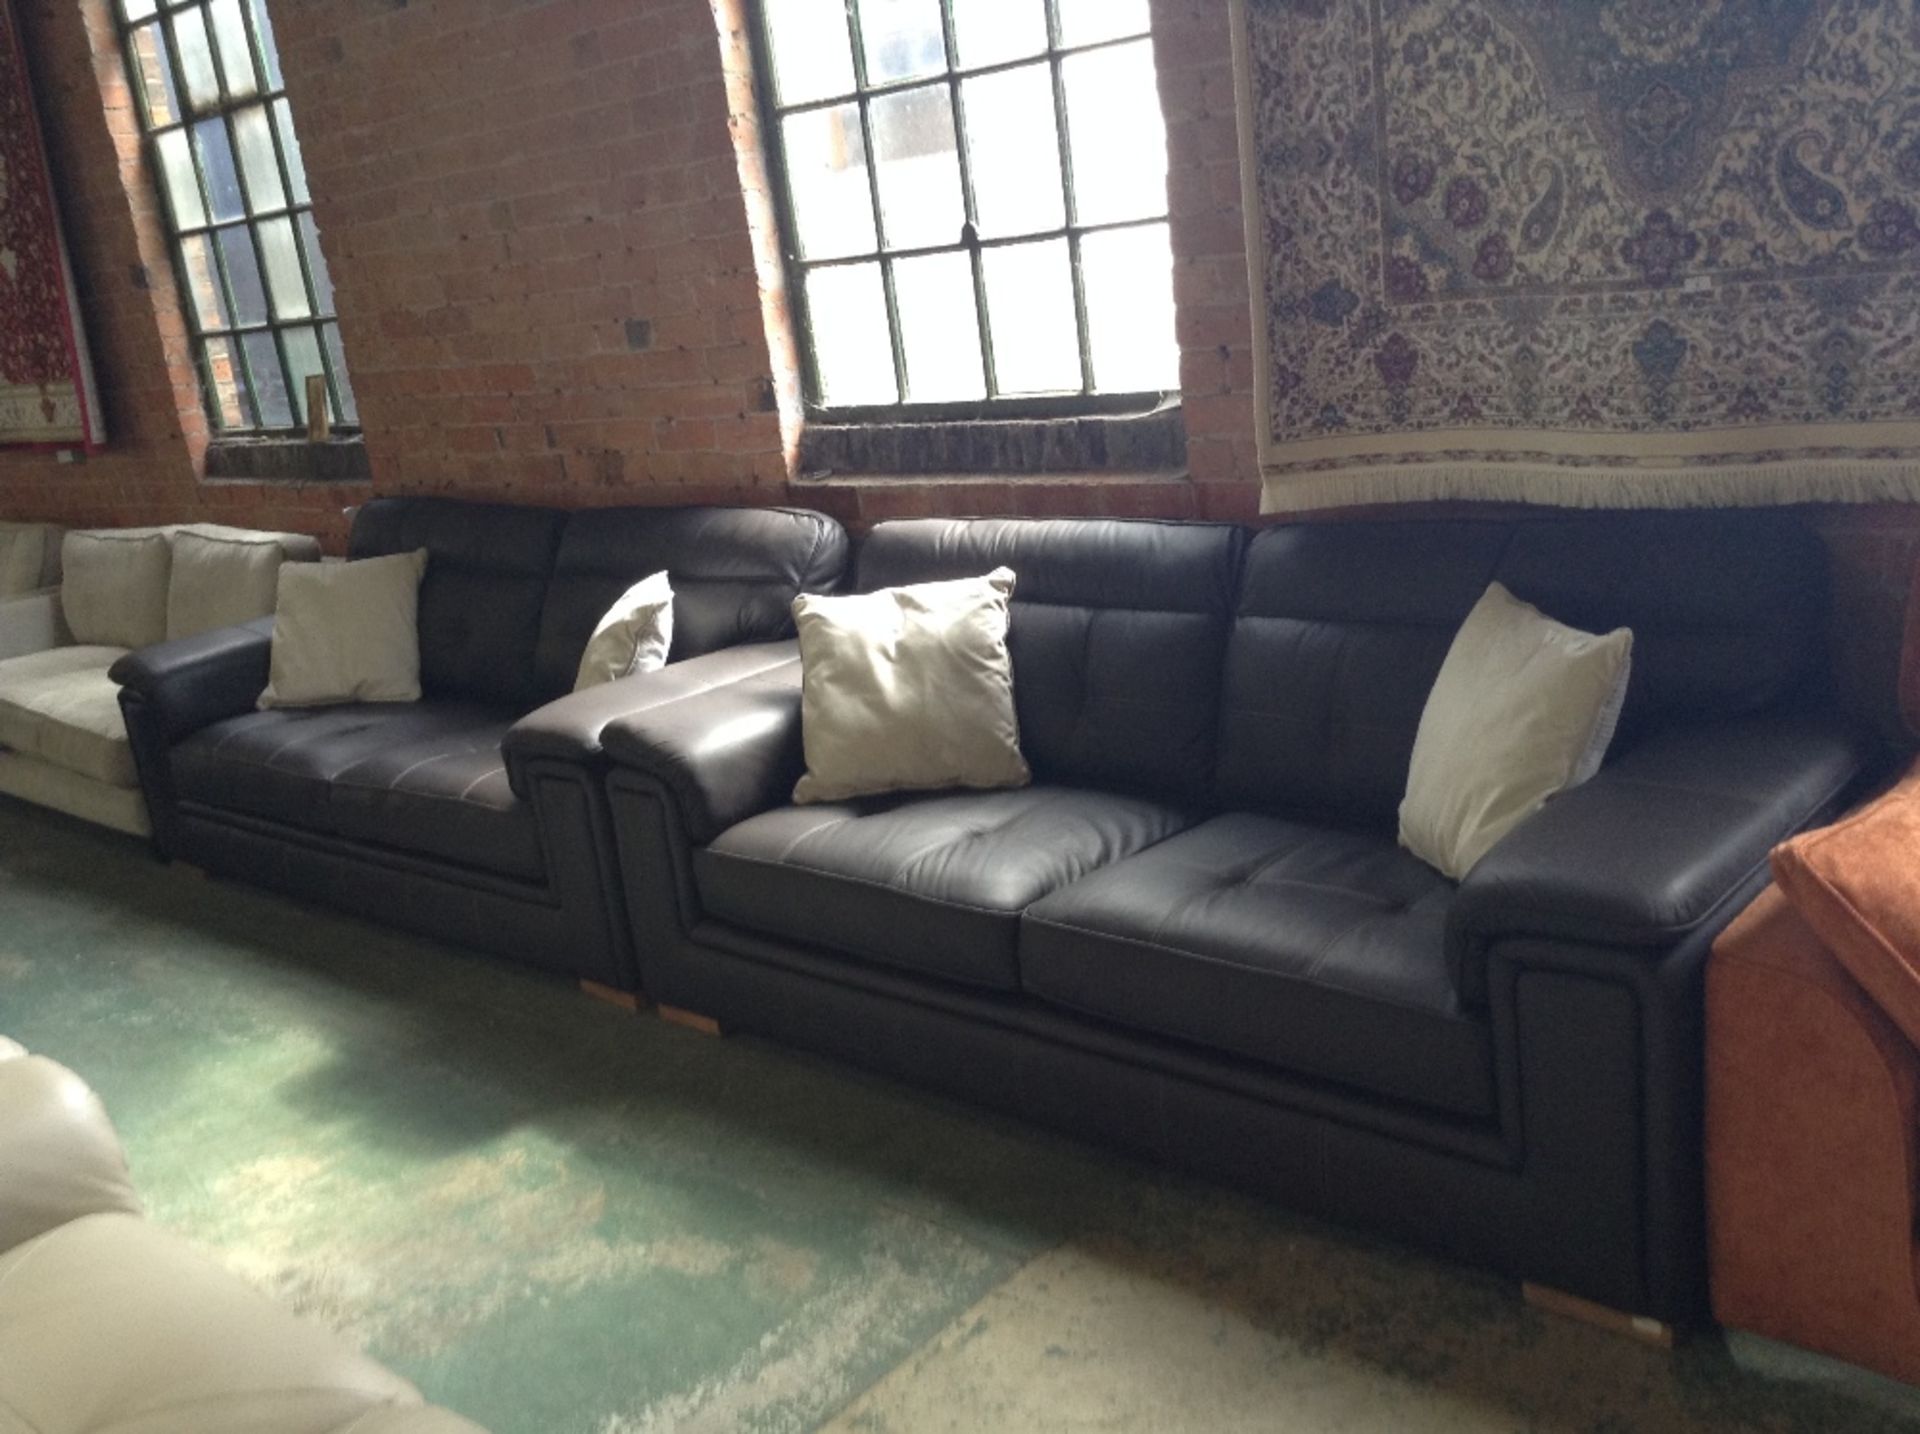 2 x BROWN LEATHER WITH WHITE STITCH 3 SEATER SOFAS